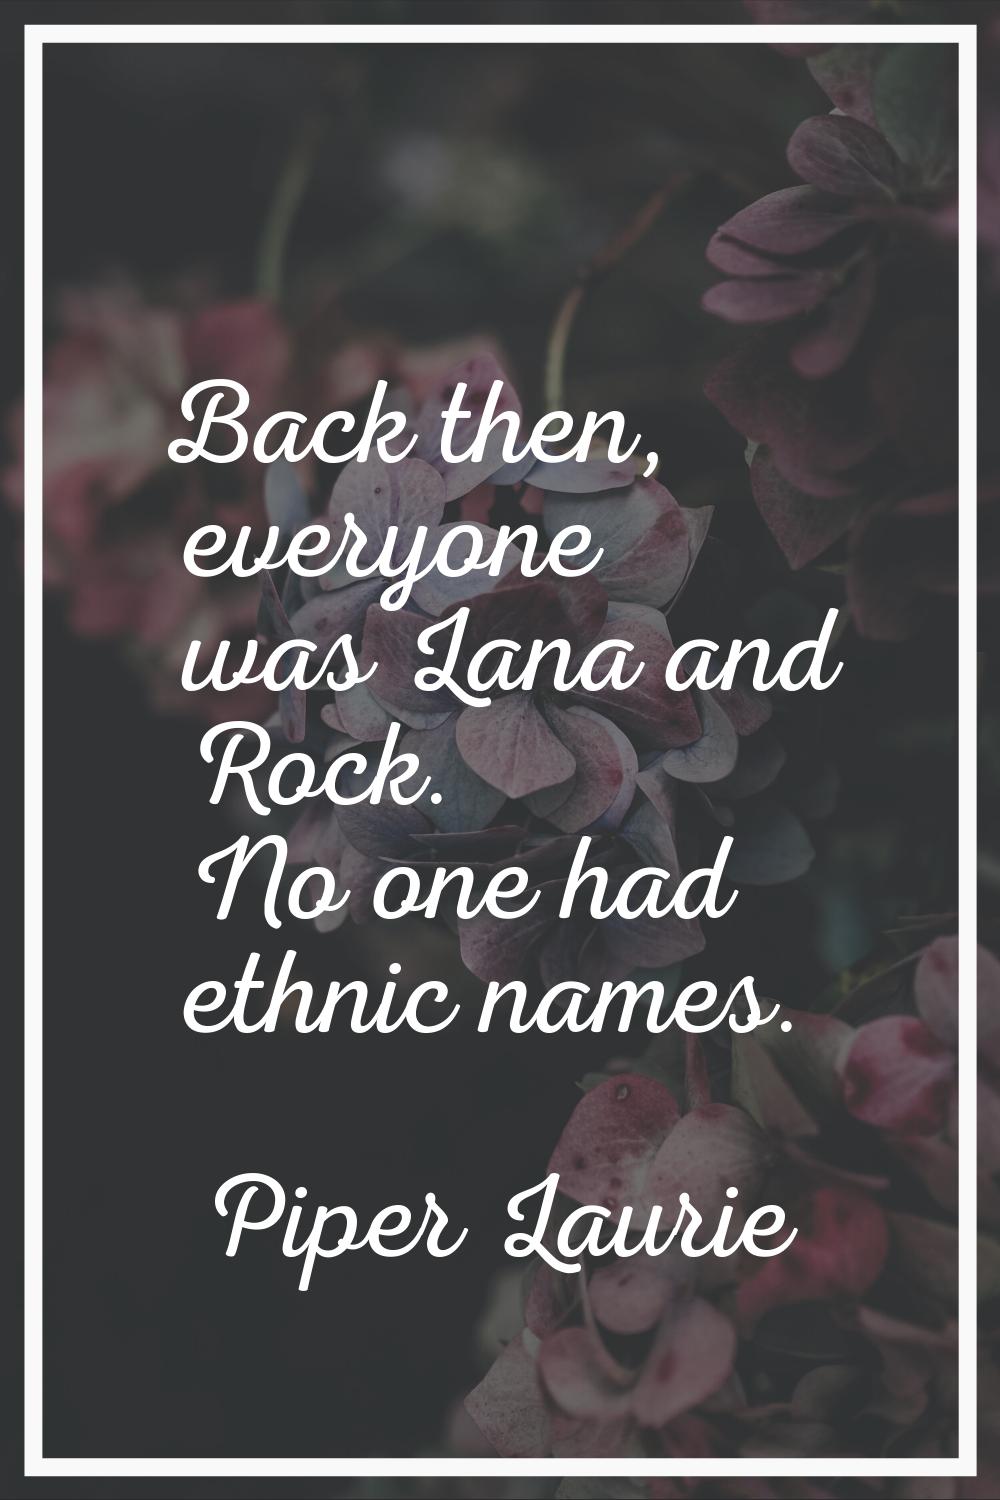 Back then, everyone was Lana and Rock. No one had ethnic names.